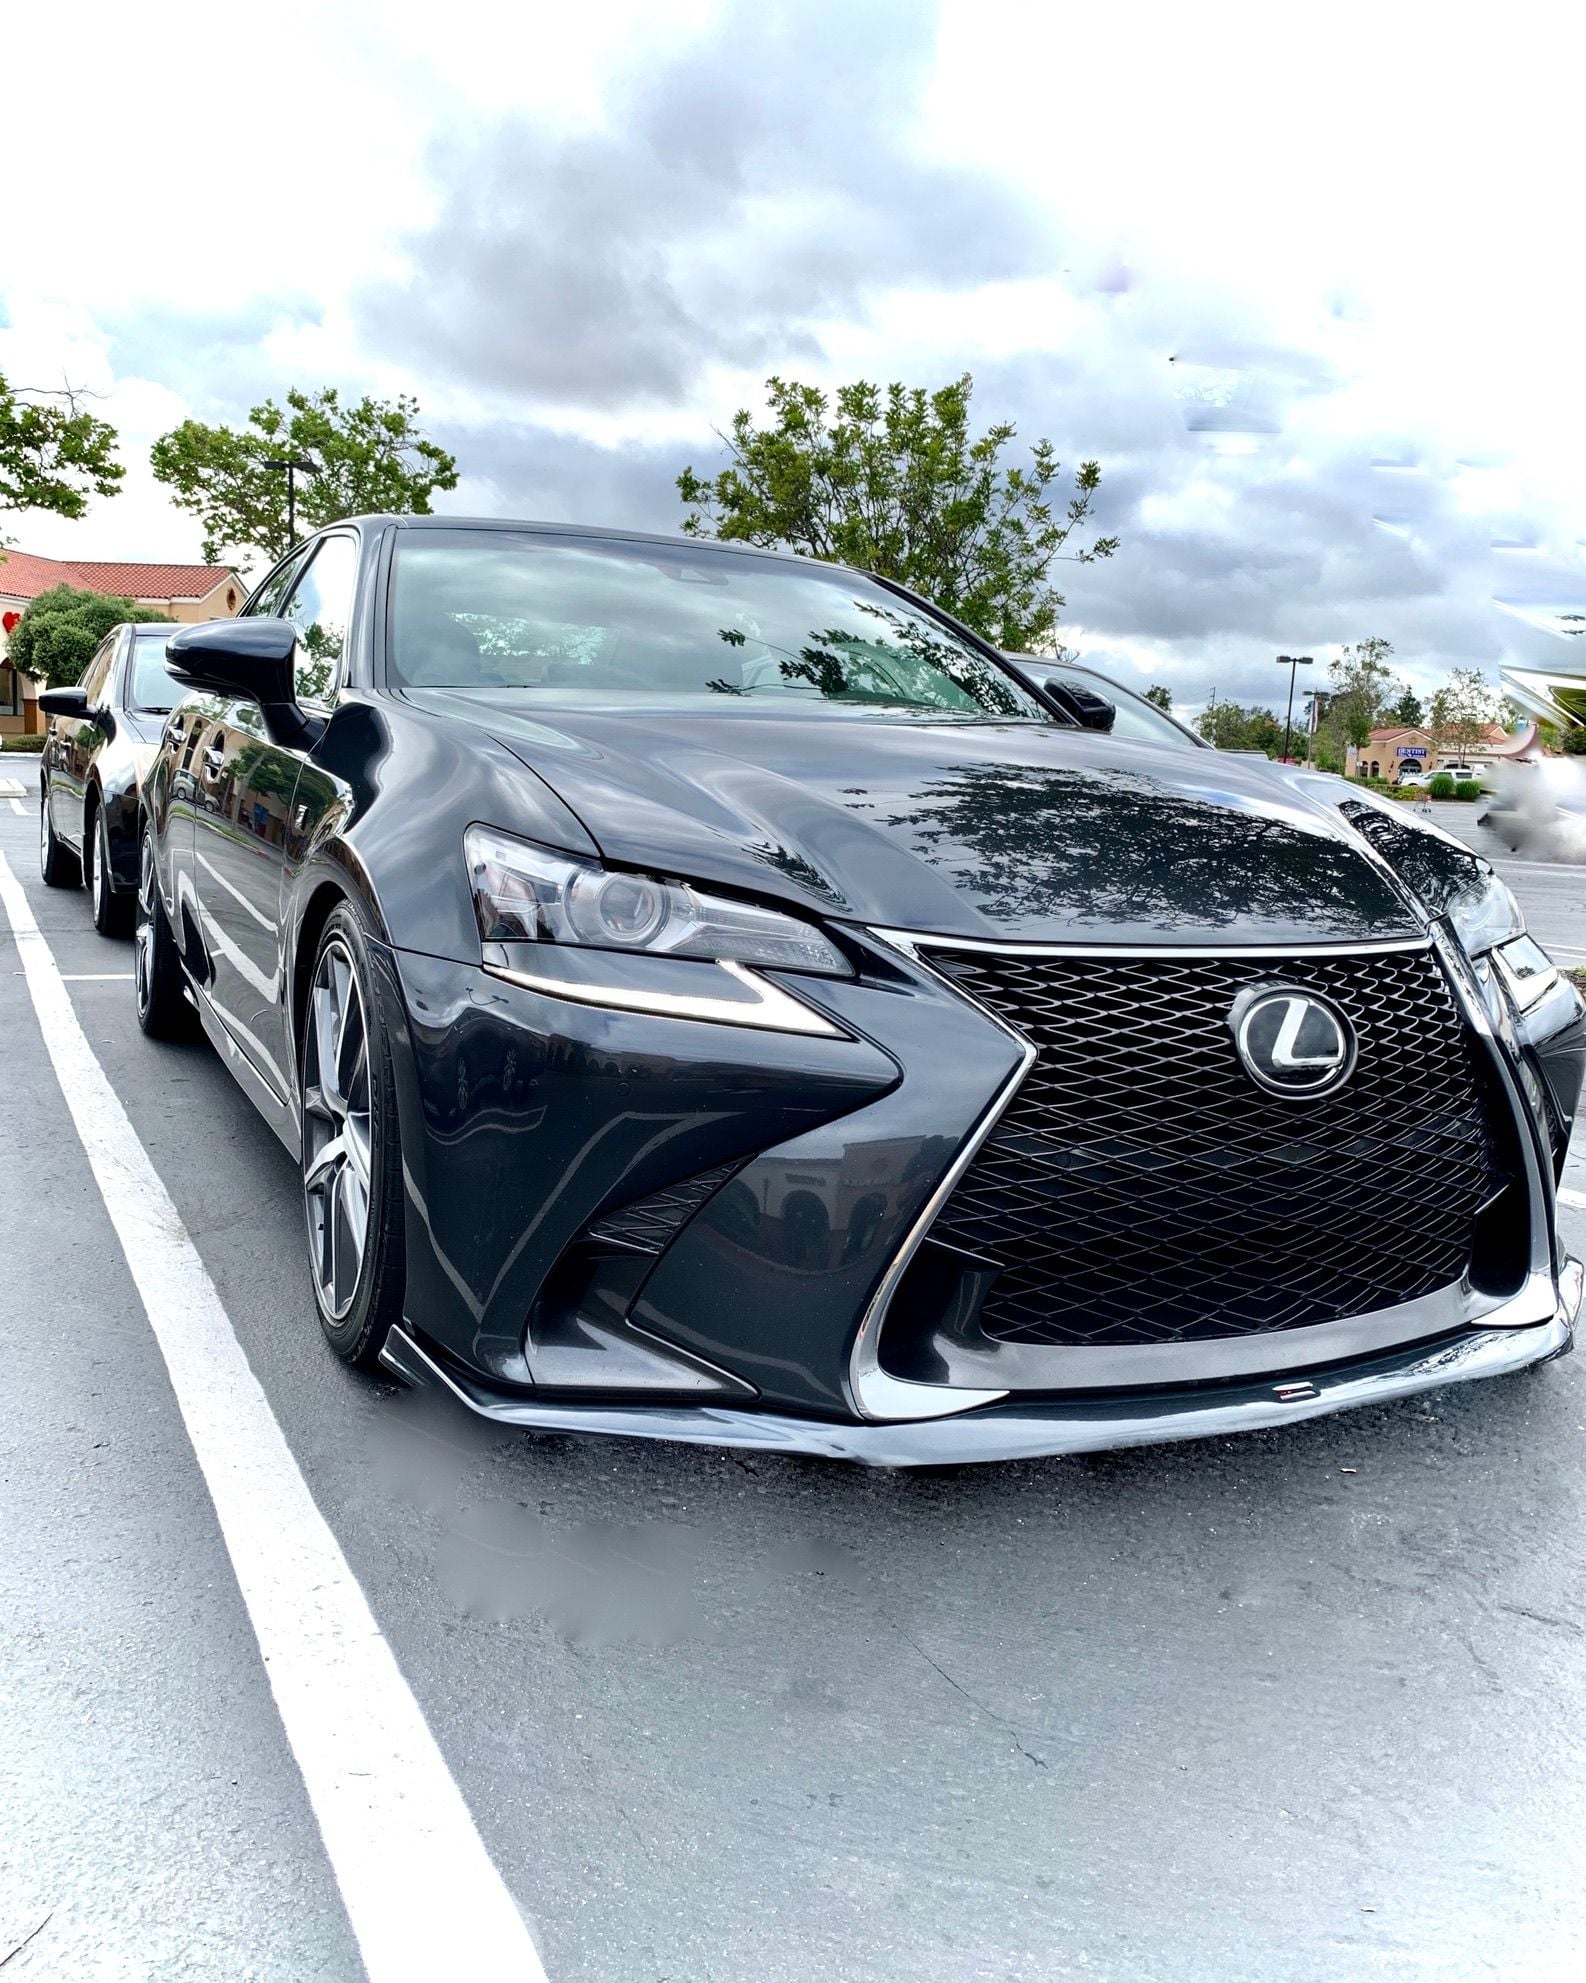 2017 Lexus GS350 - Traded in my 17 GS F sport!!! Few parts for sale - San Diego, CA 92123, United States